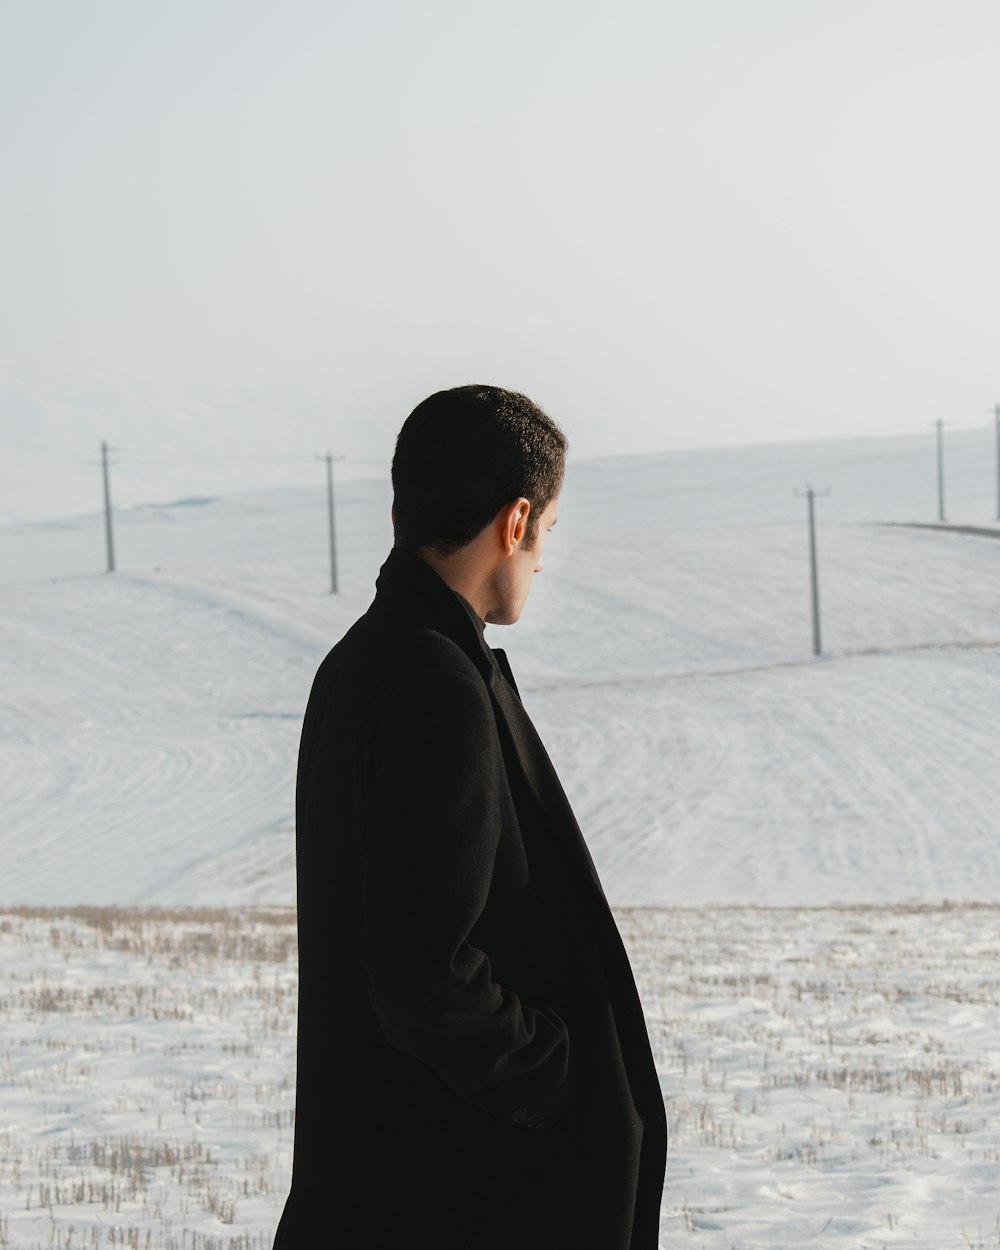 man in black coat standing on snow covered ground during daytime